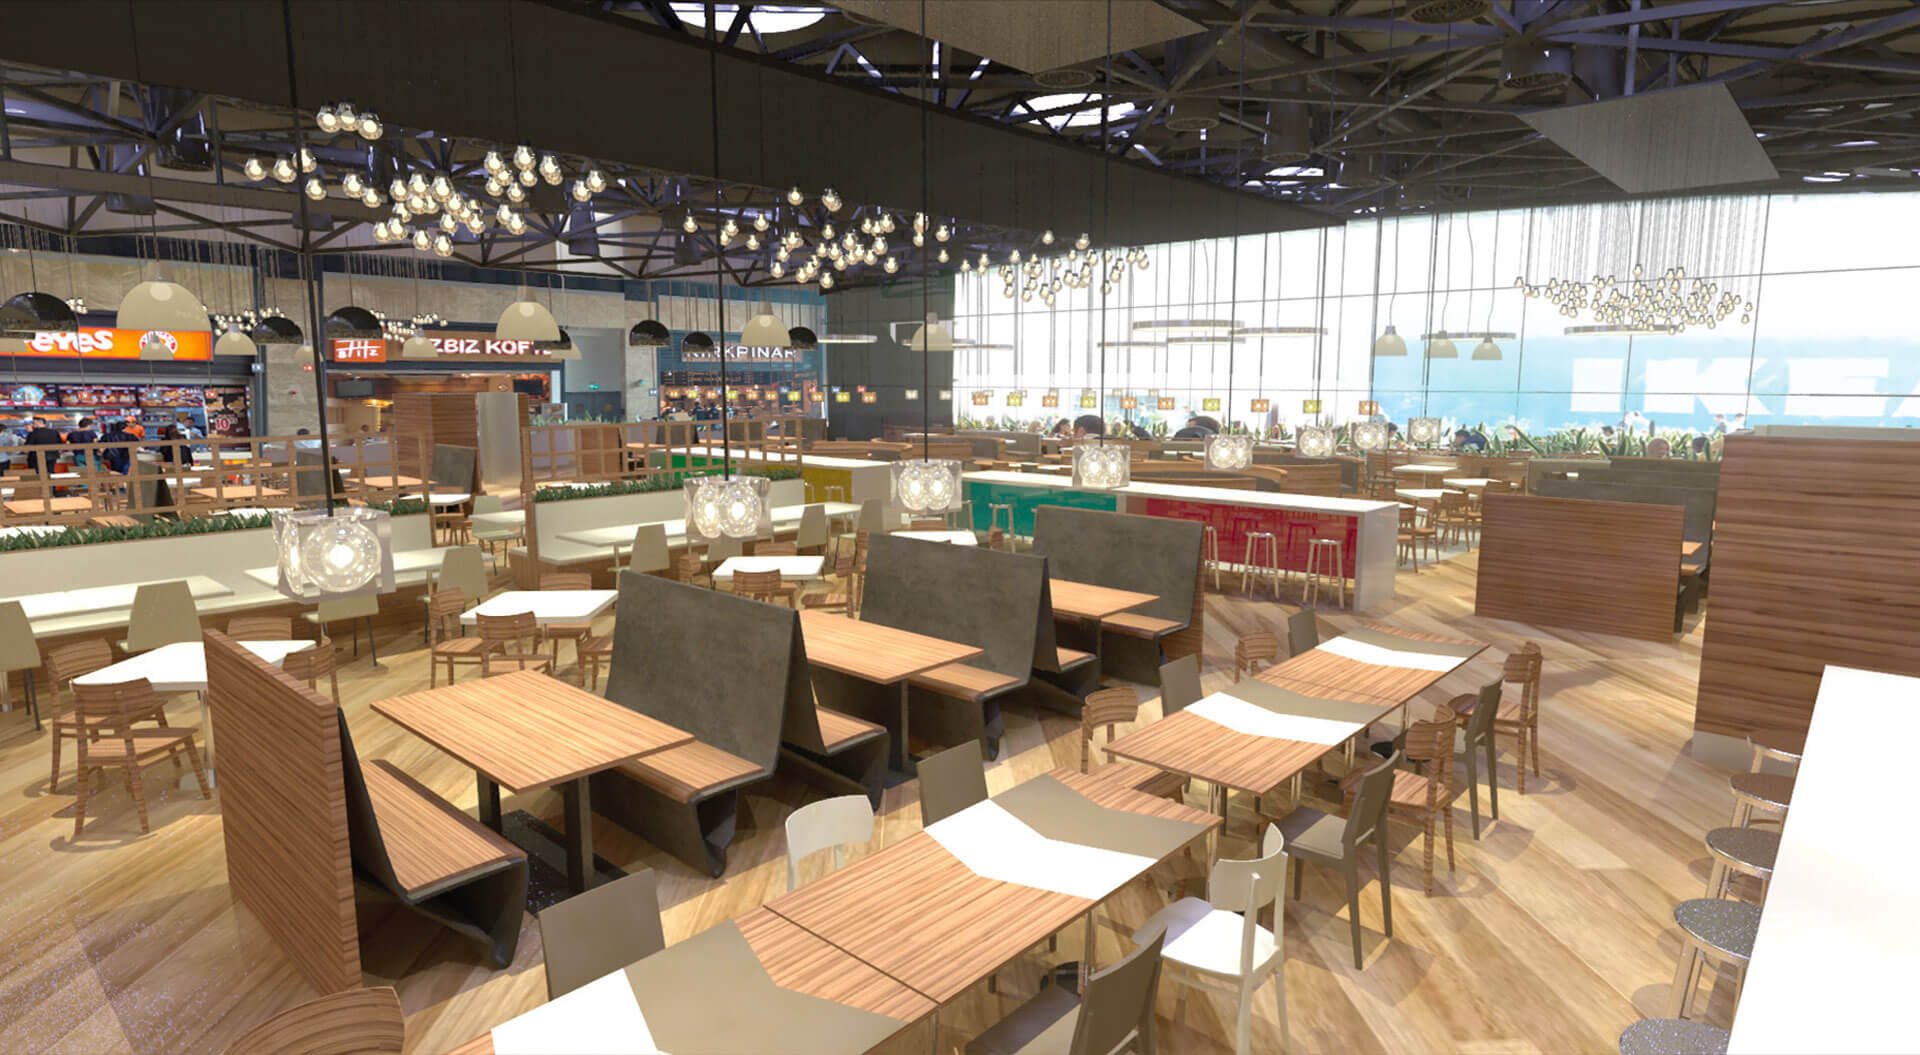 Forum Istanbul Turkey shopping mall proposed food court interior design